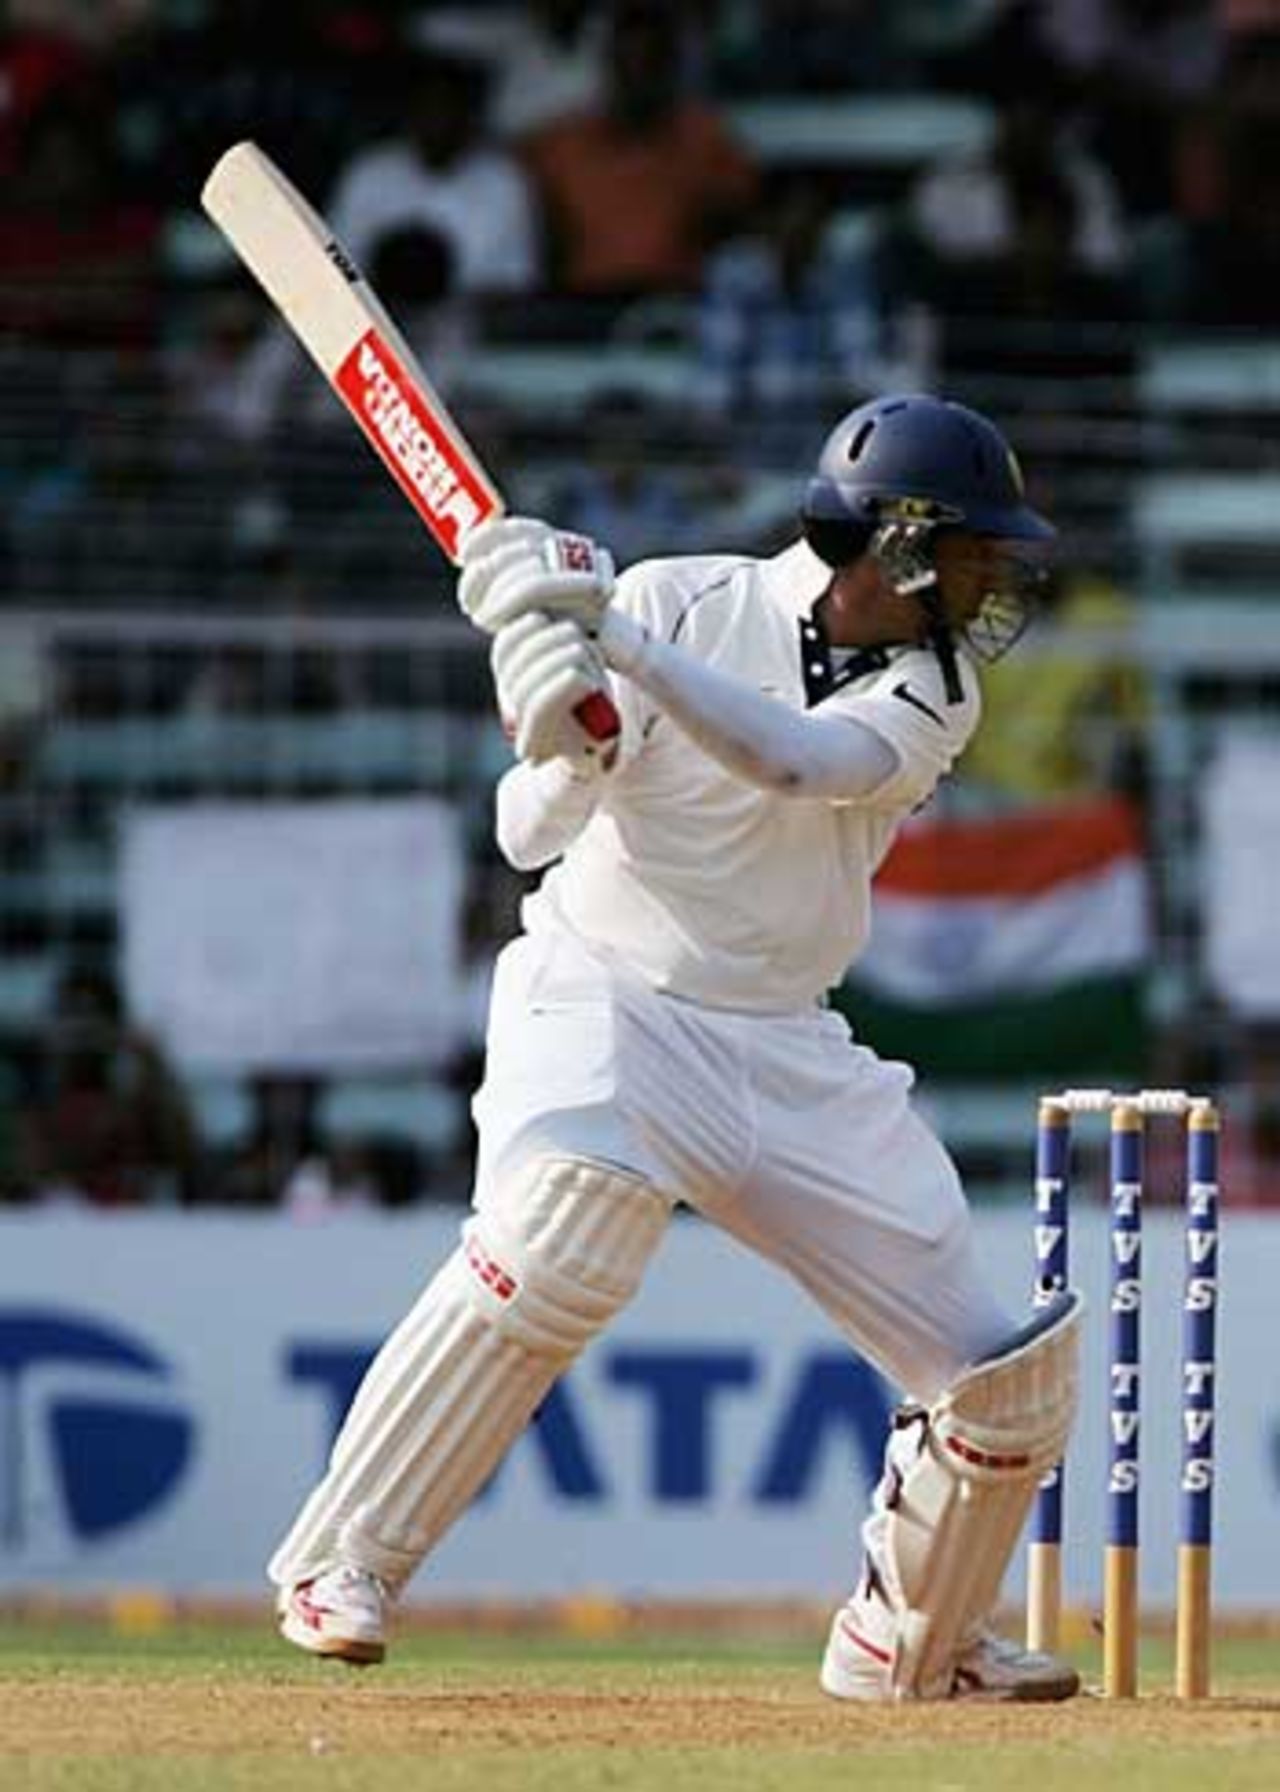 Yuvraj Singh cuts hard in India's first innings, India v England, 3rd Test, Mumbai, 2nd day, March 19 2006